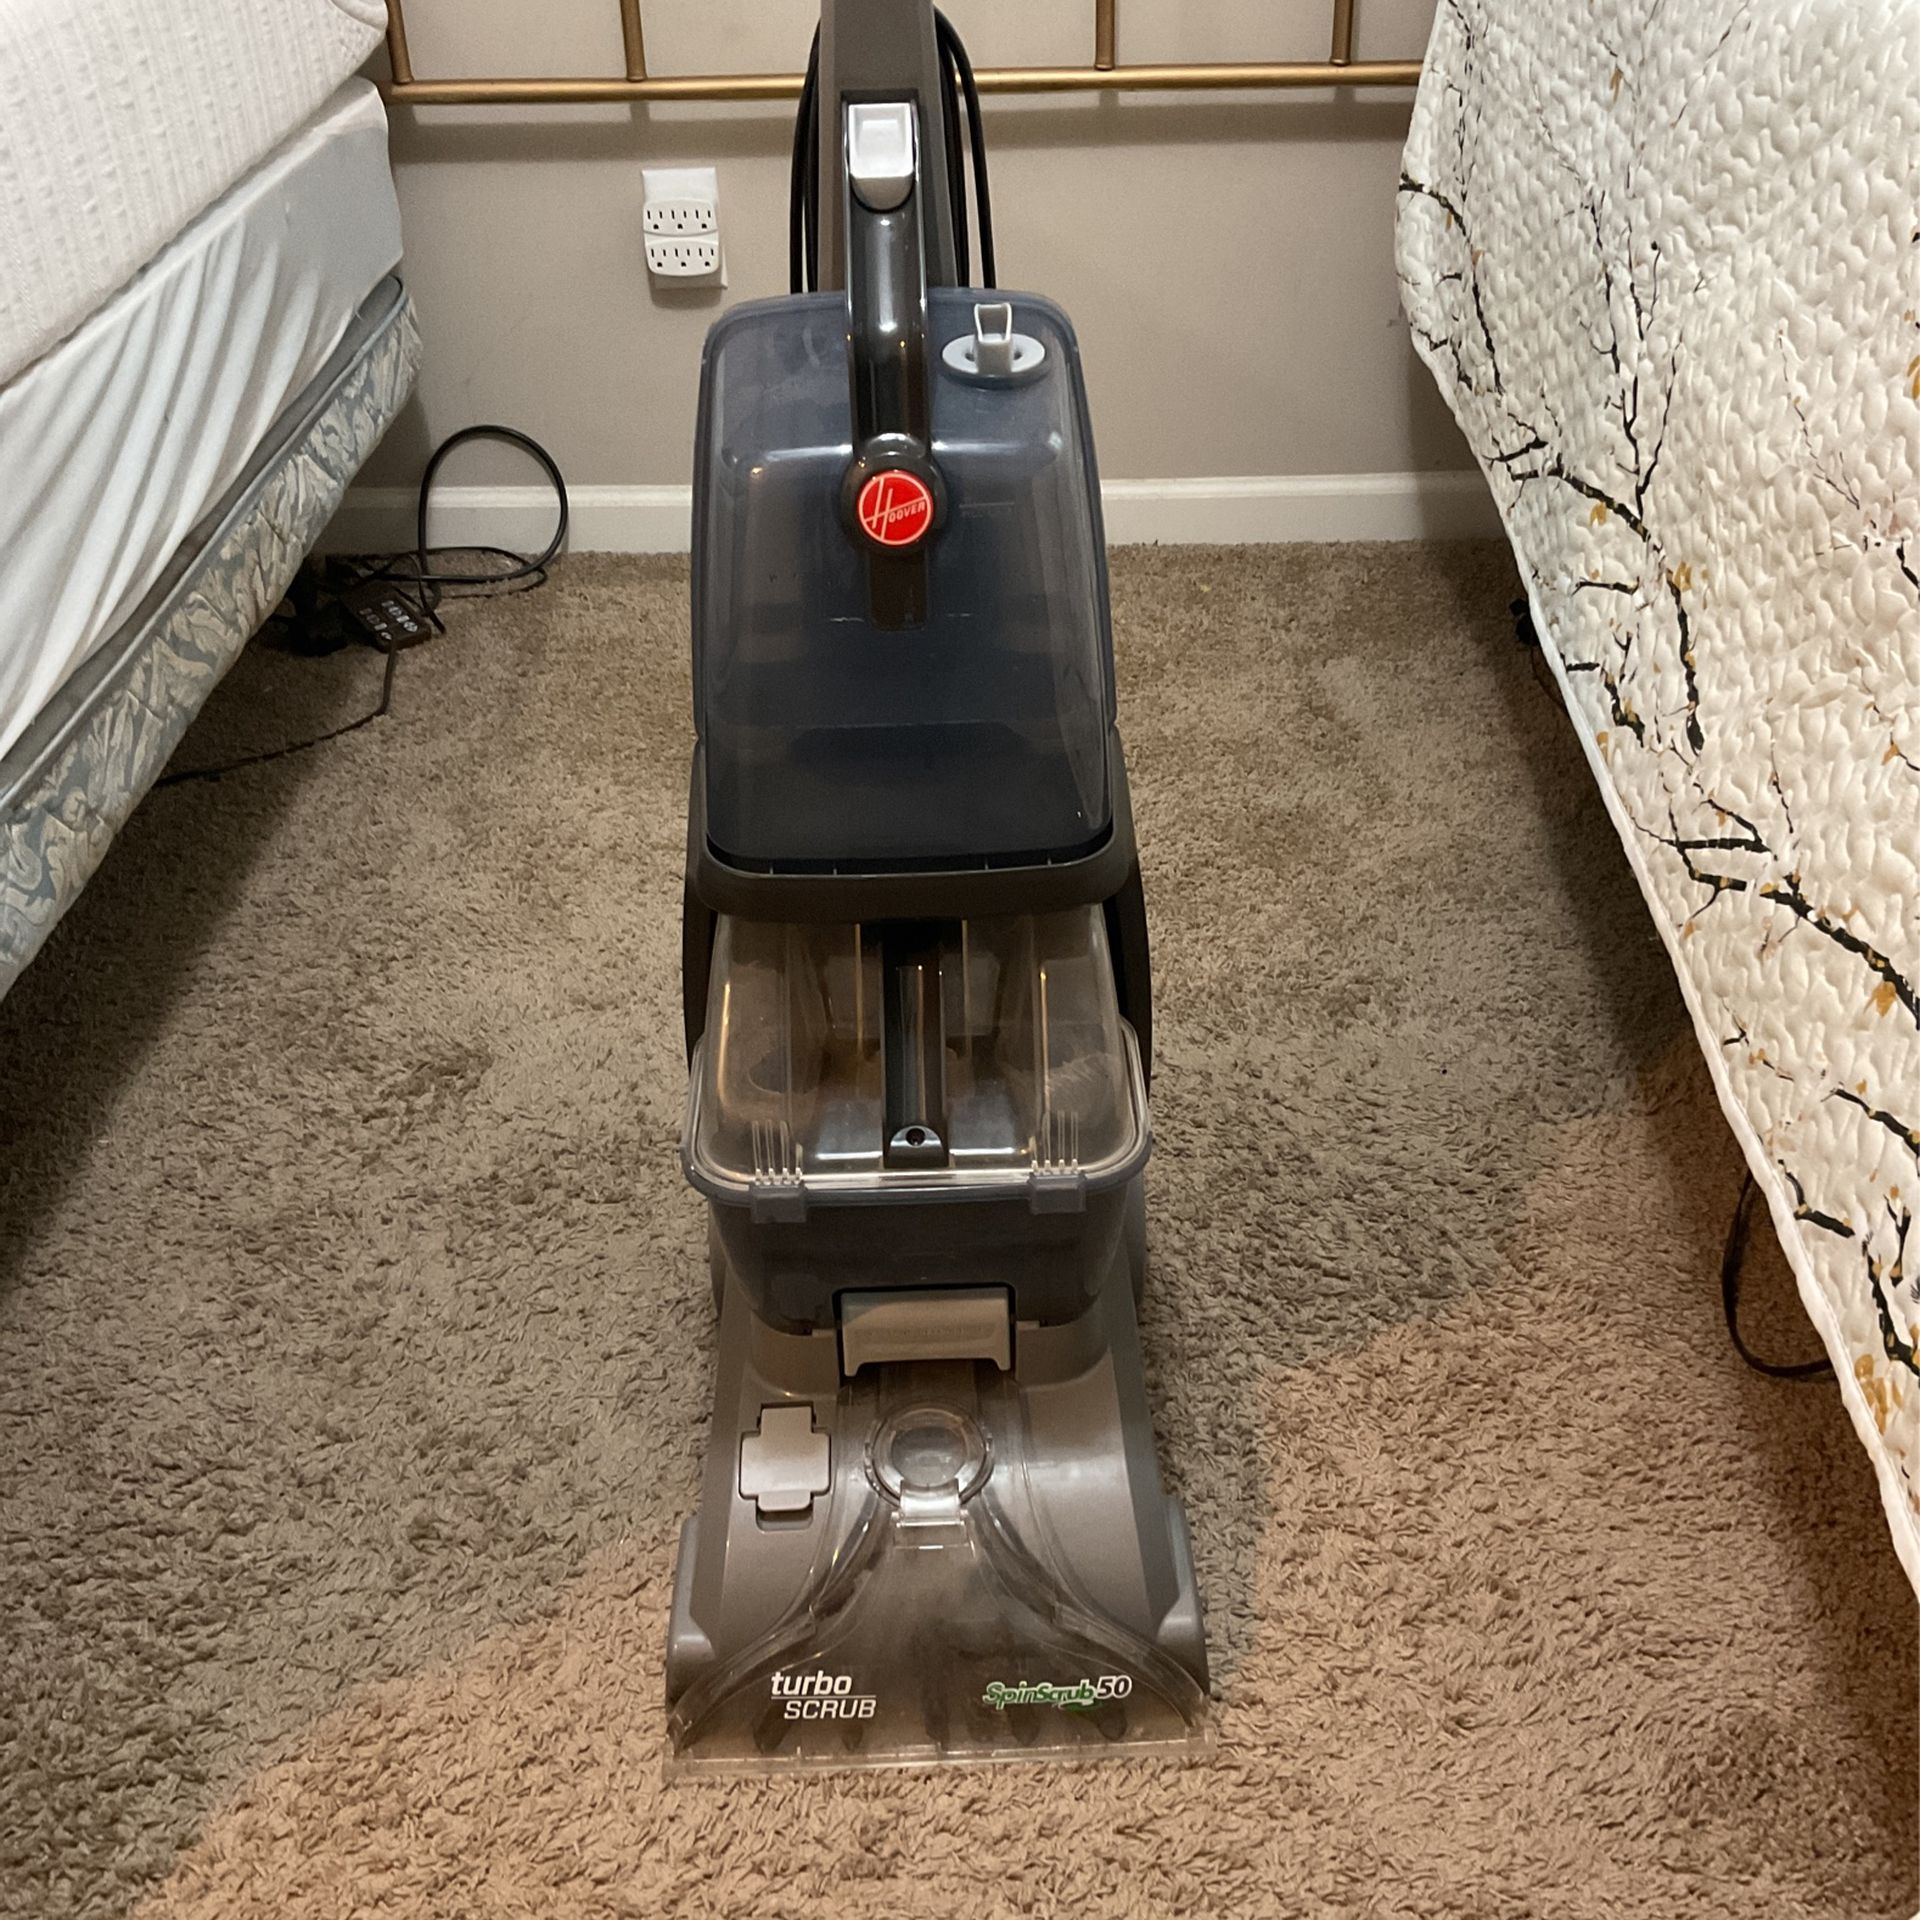 Hoover Turbo Scrub Spinscrub 50 For In Charlotte Nc Offerup